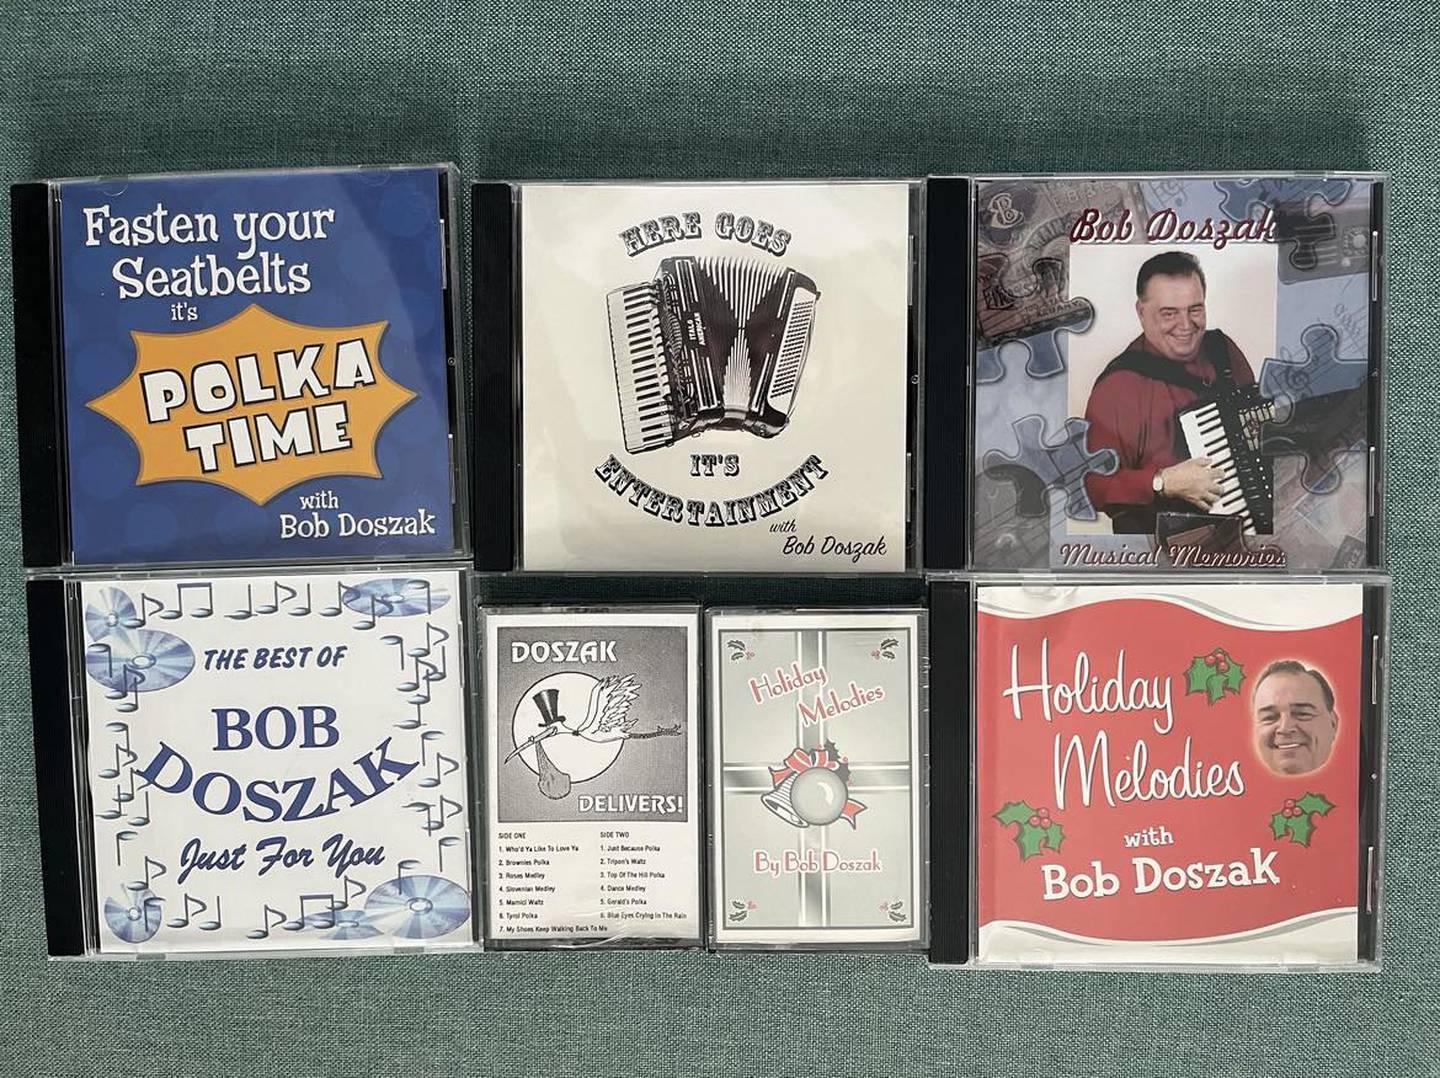 Bob Doszak performed so many festivals, weddings, dances, parades and church events, people dubbed him Joliet’s Polka King, He leaves behind professional recordings of music for future generations to enjoy.